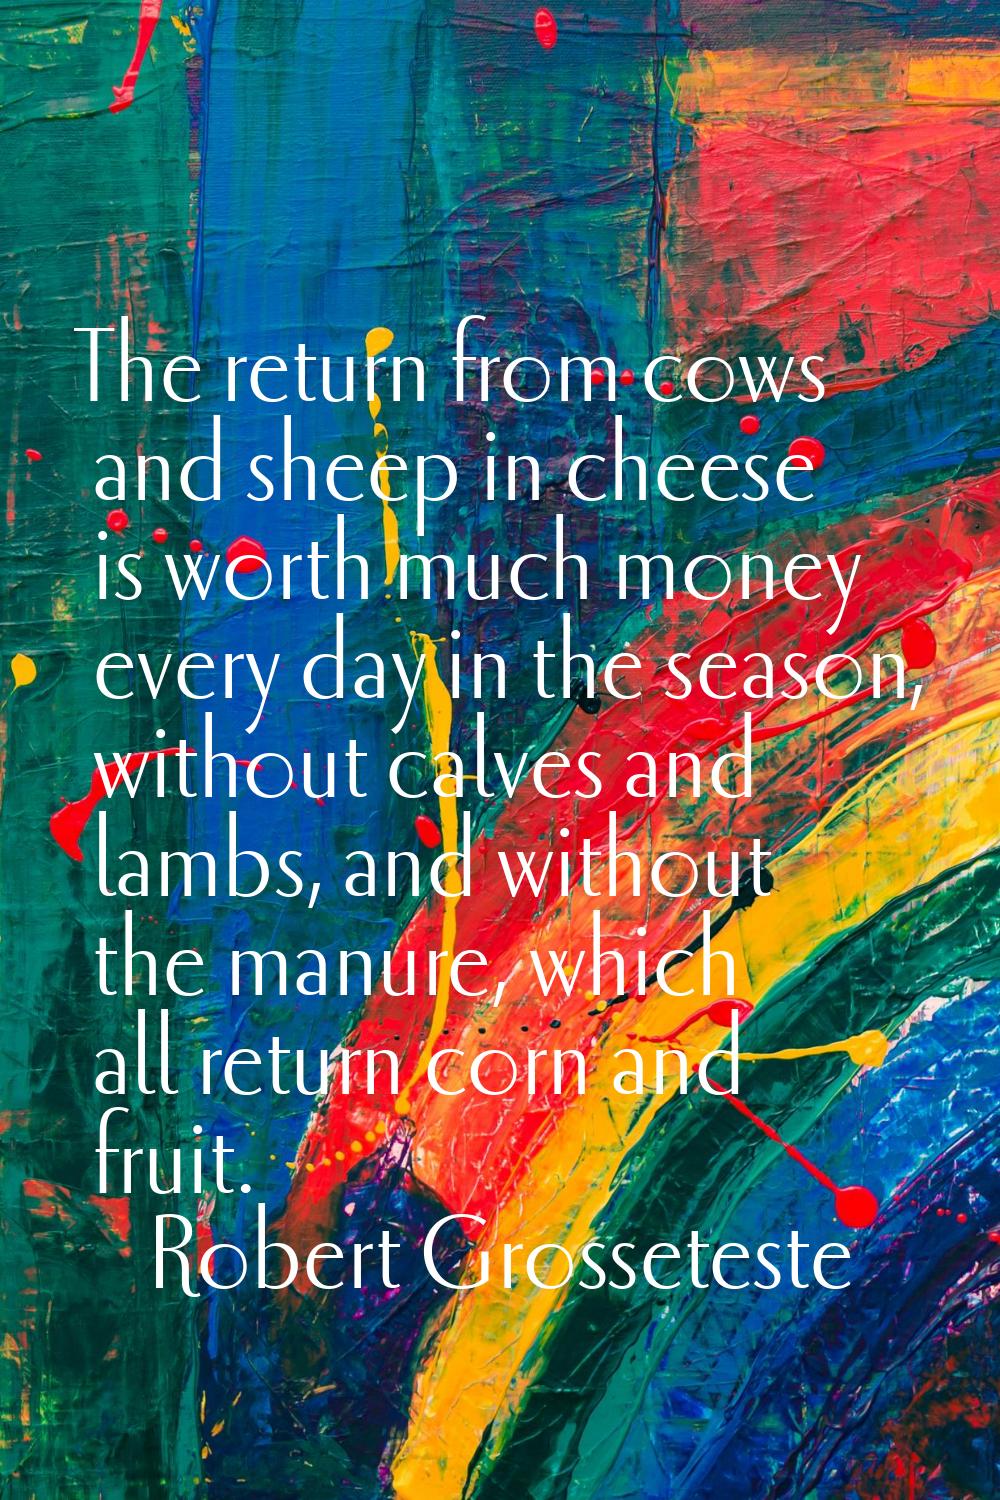 The return from cows and sheep in cheese is worth much money every day in the season, without calve